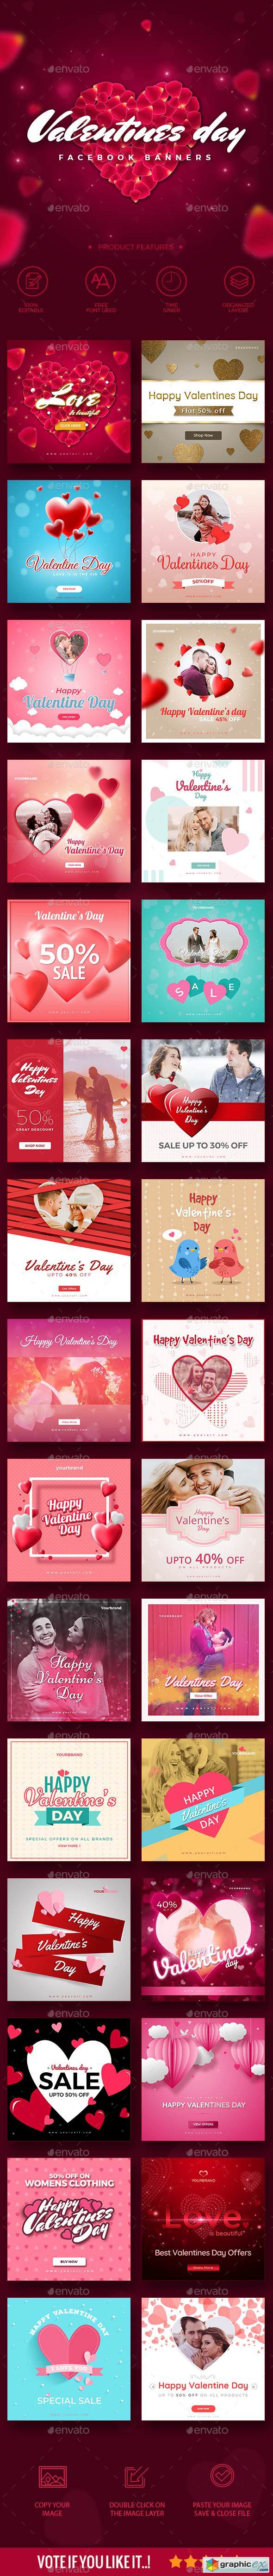 30 Valentines Day Instagram Promotion Banners